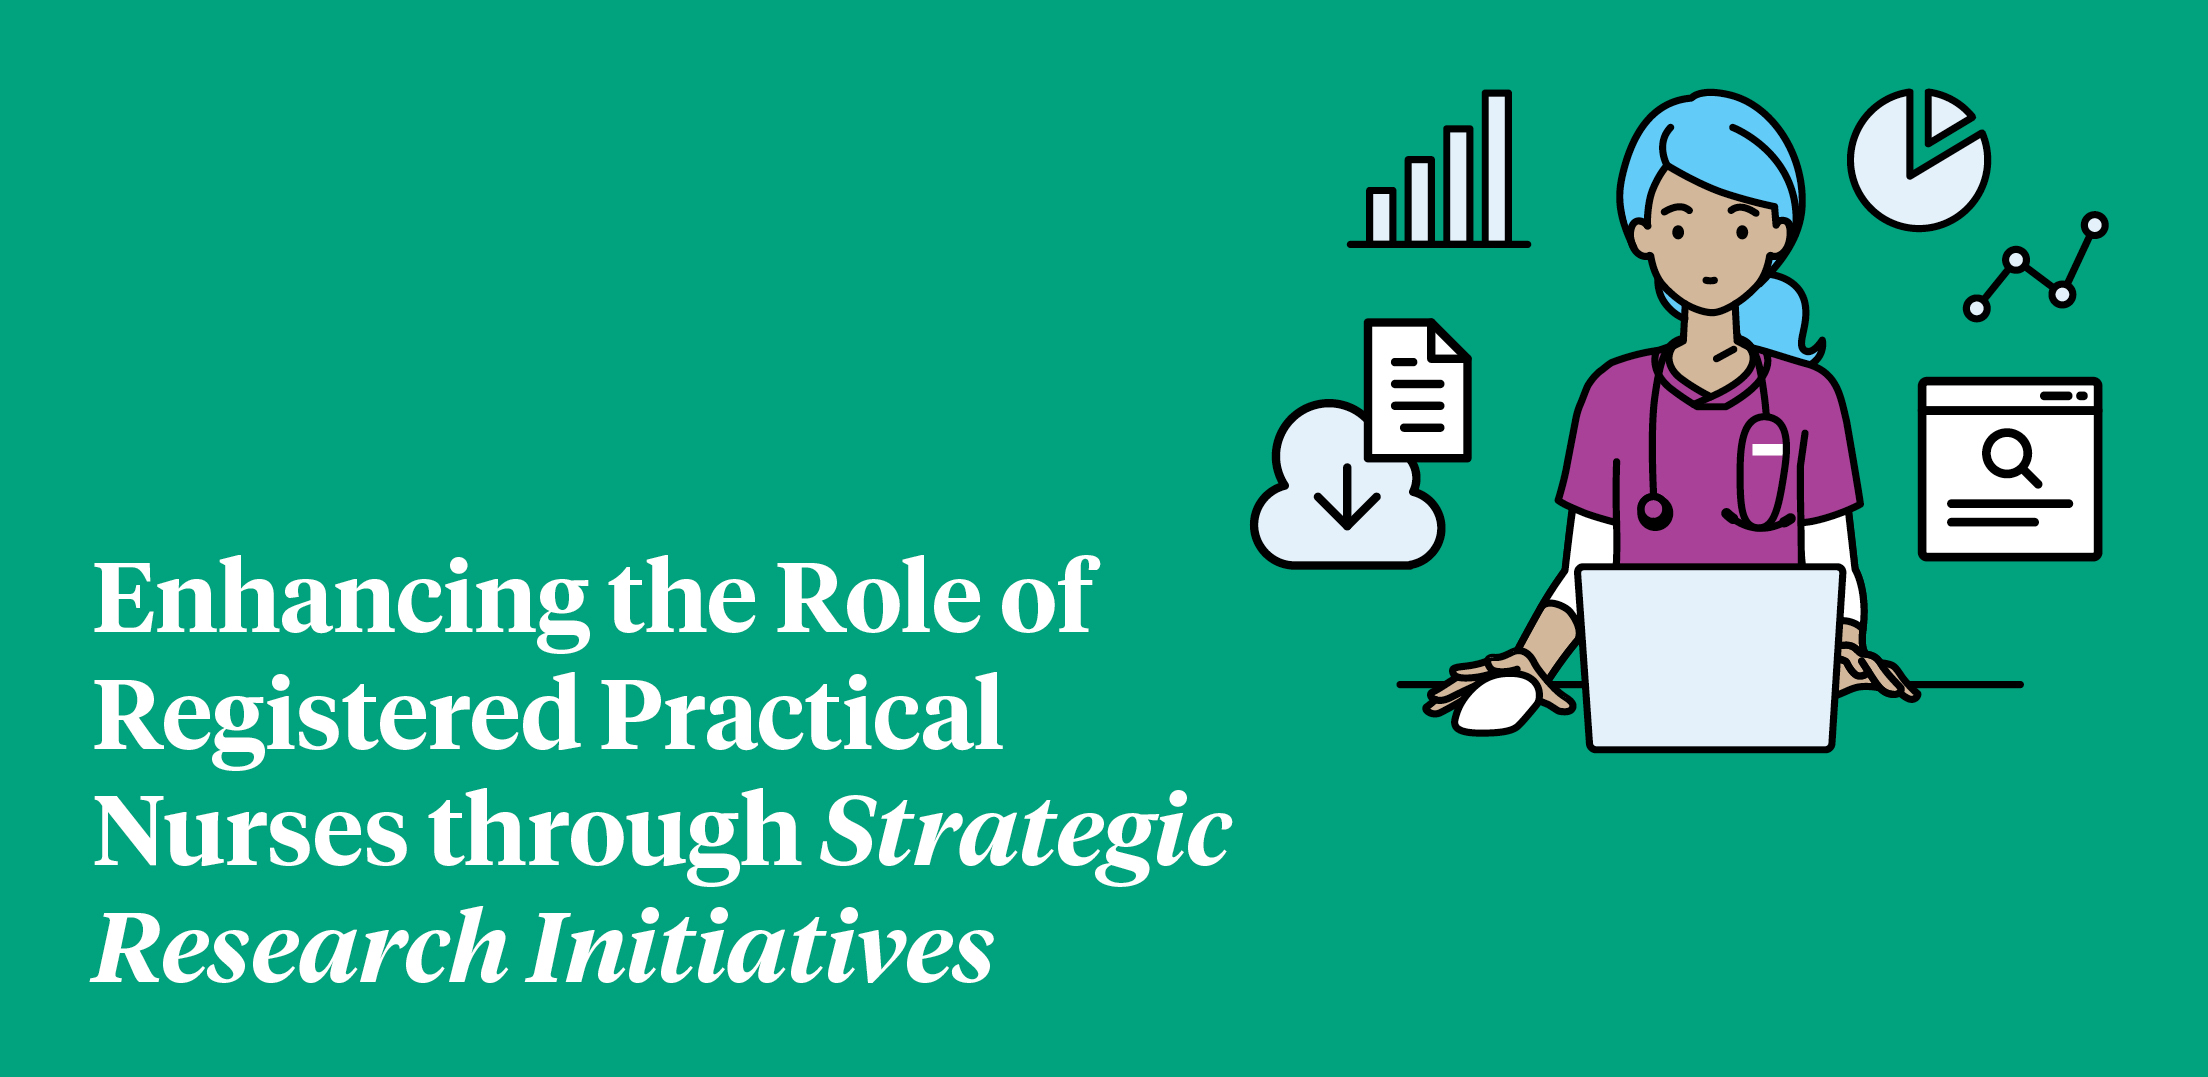 Enhancing the Role of Registered Practical Nurses through Strategic Research Initiatives